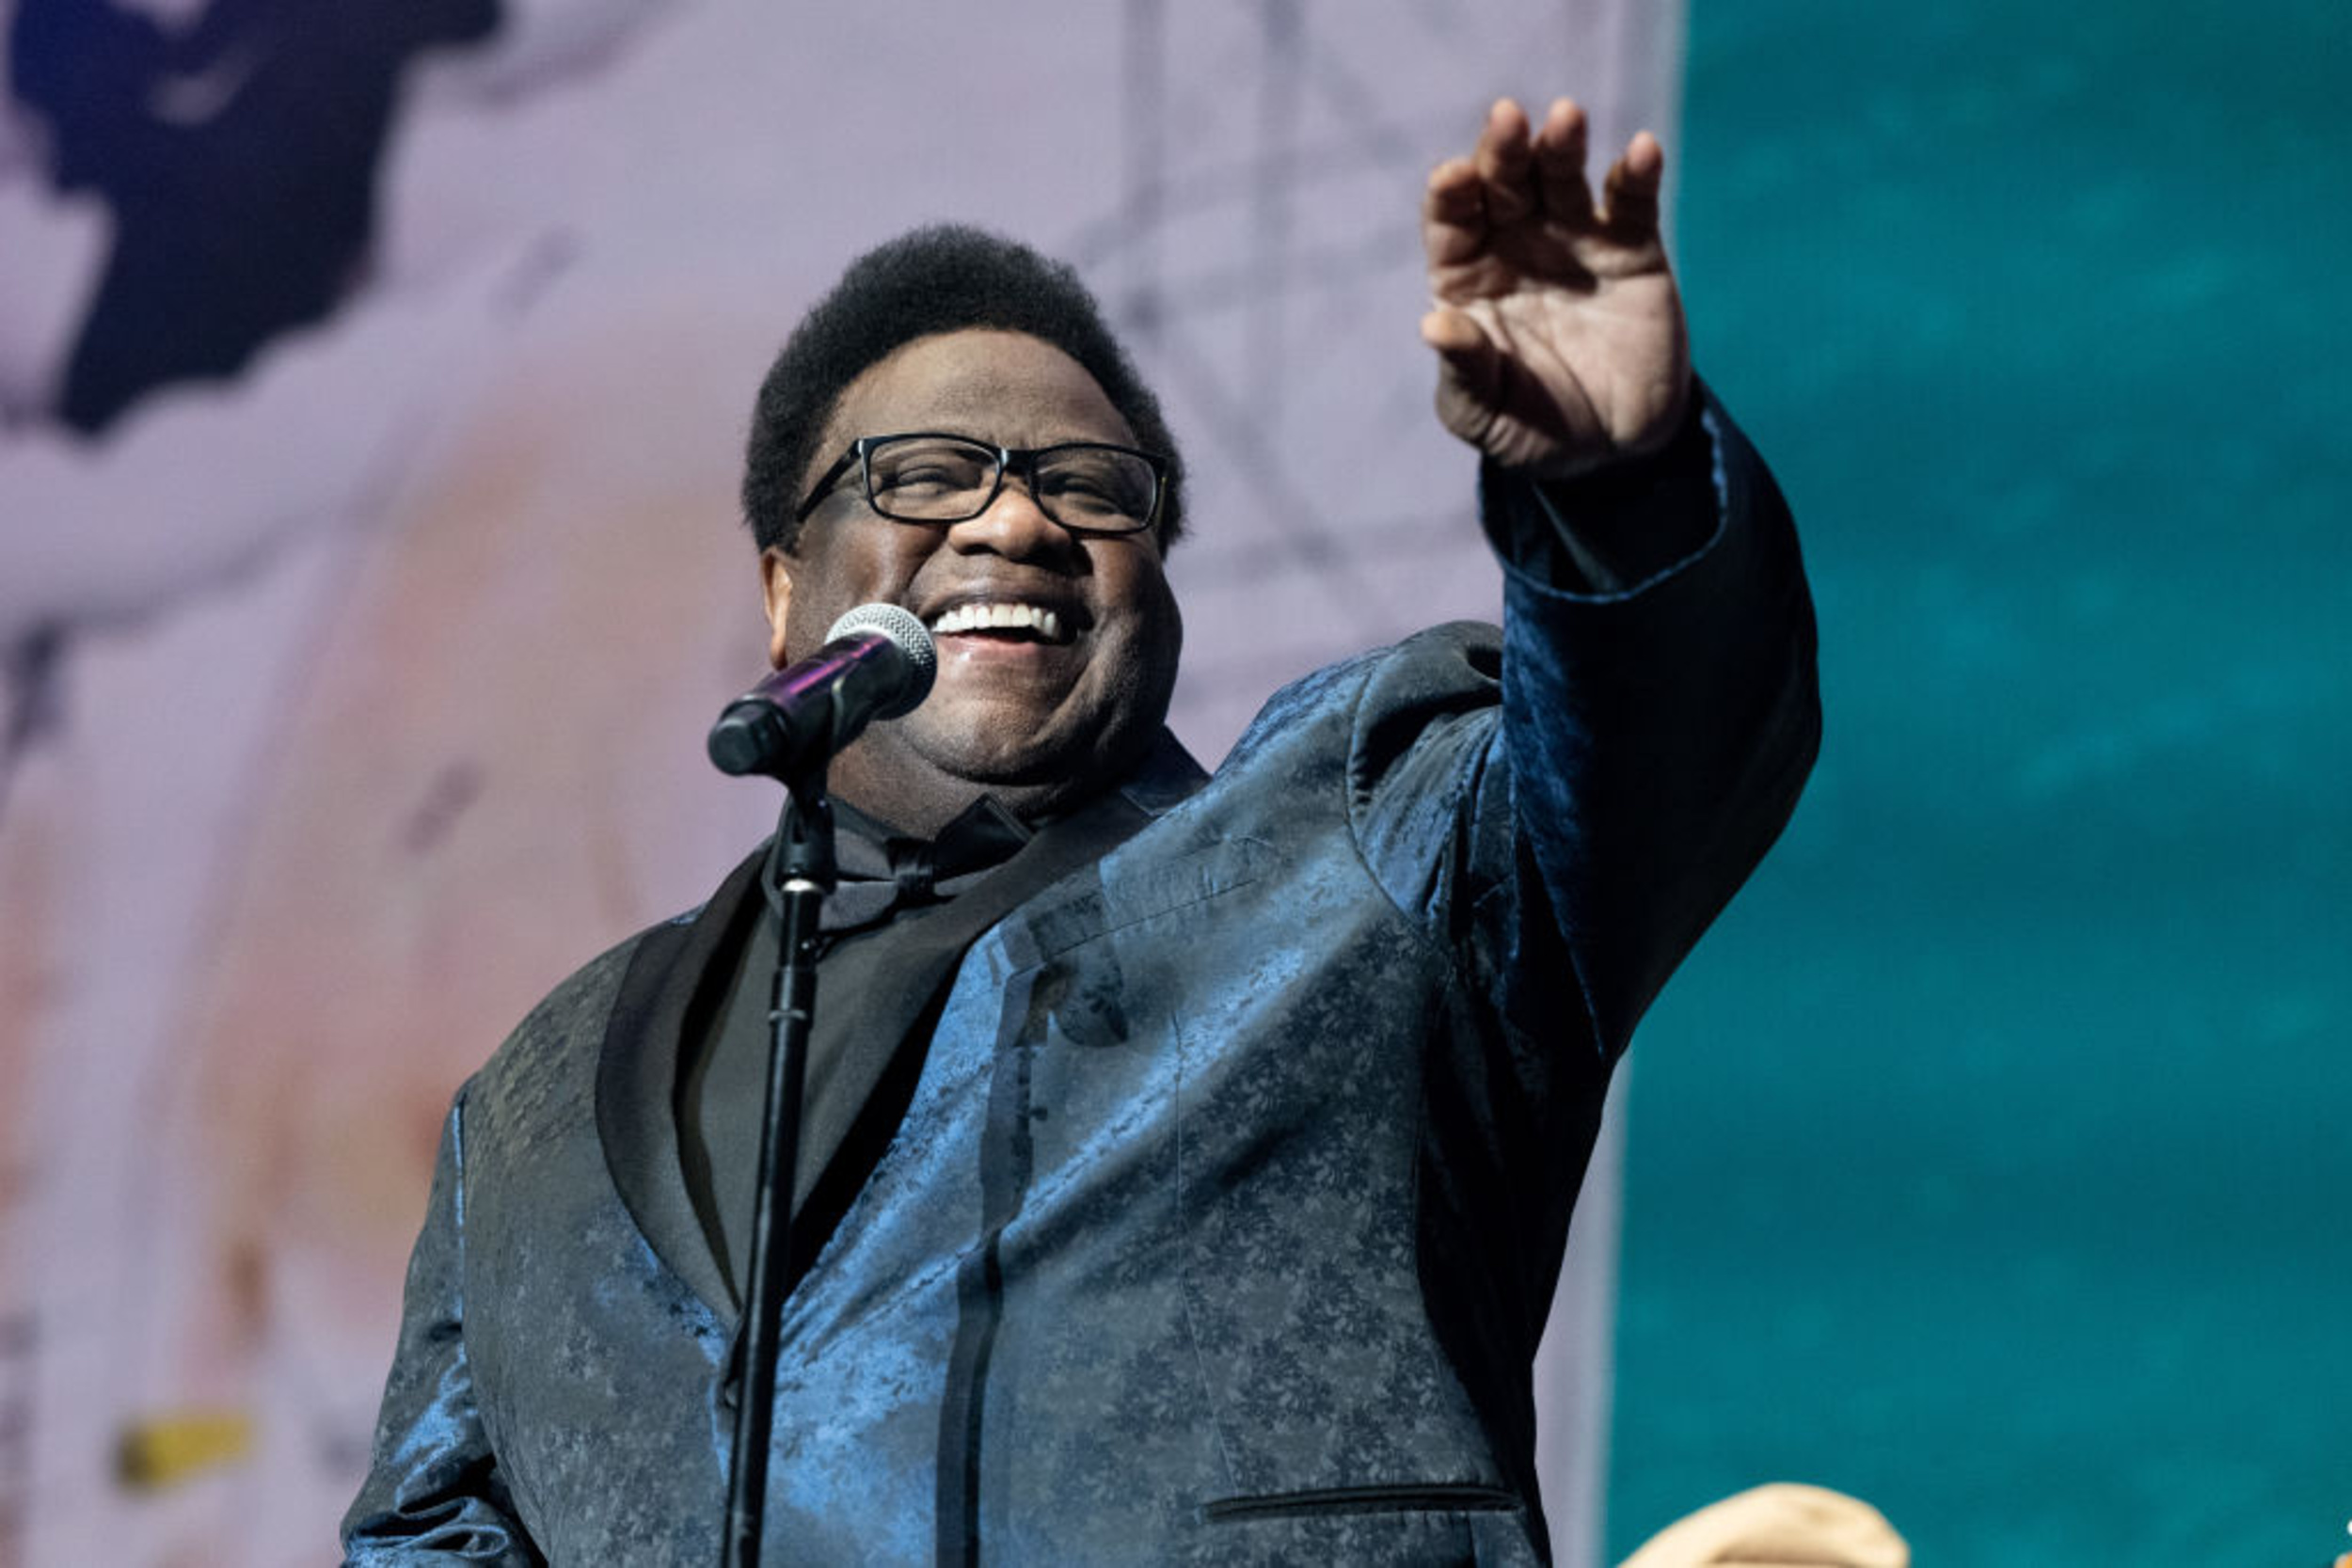 <p>Al Green wants to show his partner exactly how they make him feel on his 1972 hit single “Let’s Stay Together.” On the track, he emphasizes of why people break up to make up, and how he wants to spend forever with his partner. As he sings on the hook, “Oh baby, let’s, let’s stay together / Loving you whether, whether / Times are good or bad, happy or sad.” </p><p><a href='https://www.msn.com/en-us/community/channel/vid-cj9pqbr0vn9in2b6ddcd8sfgpfq6x6utp44fssrv6mc2gtybw0us'>Follow us on MSN to see more of our exclusive entertainment content.</a></p>